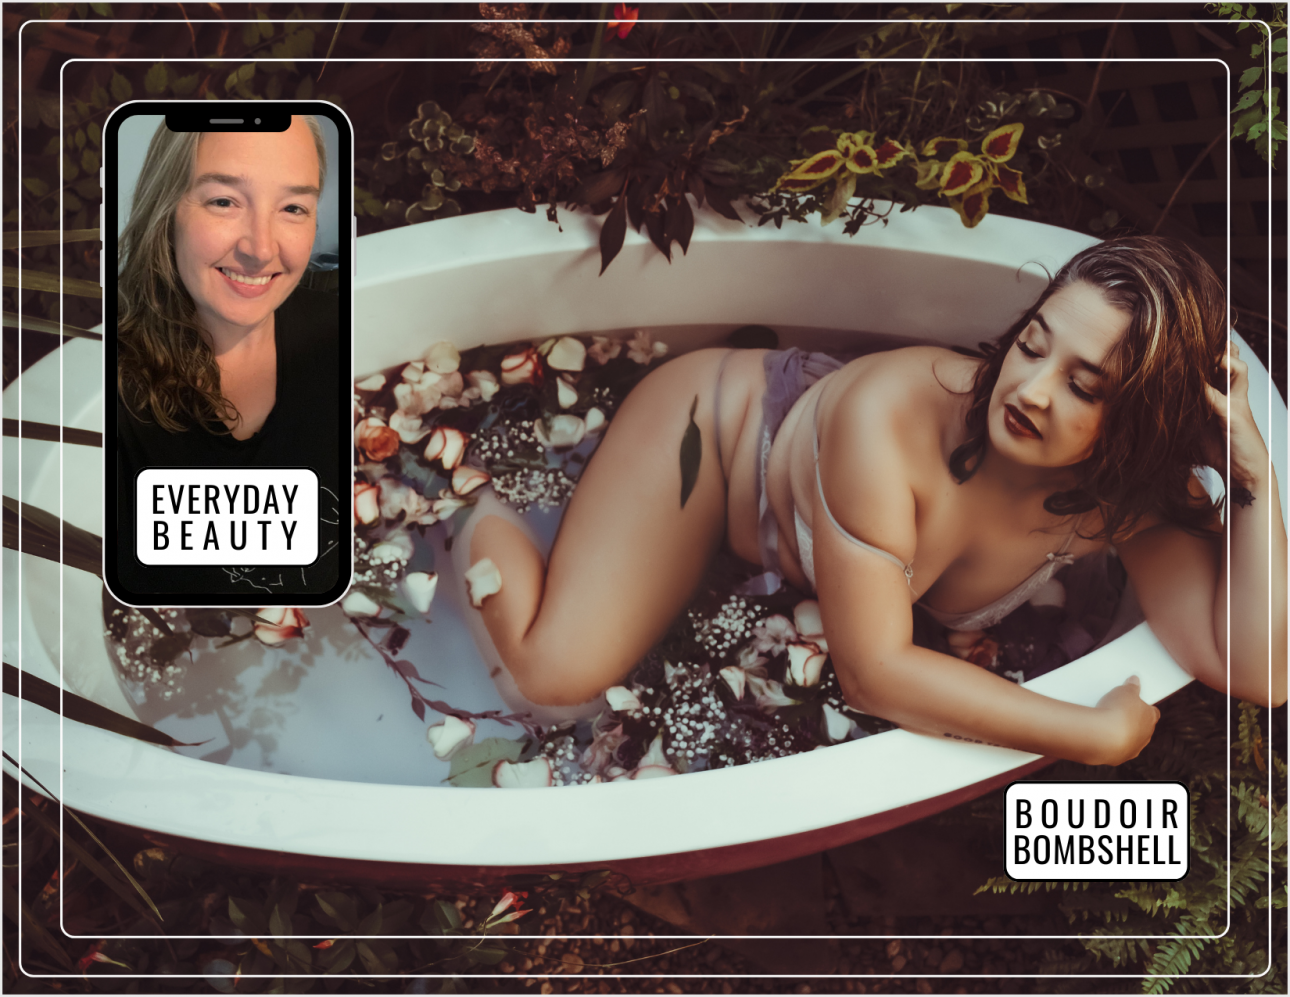 Photo of Miss K in her daily life paired with a photo of Miss K in light purple lingerie in an outdoor bathtub filled with flowers during her boudoir photo session.